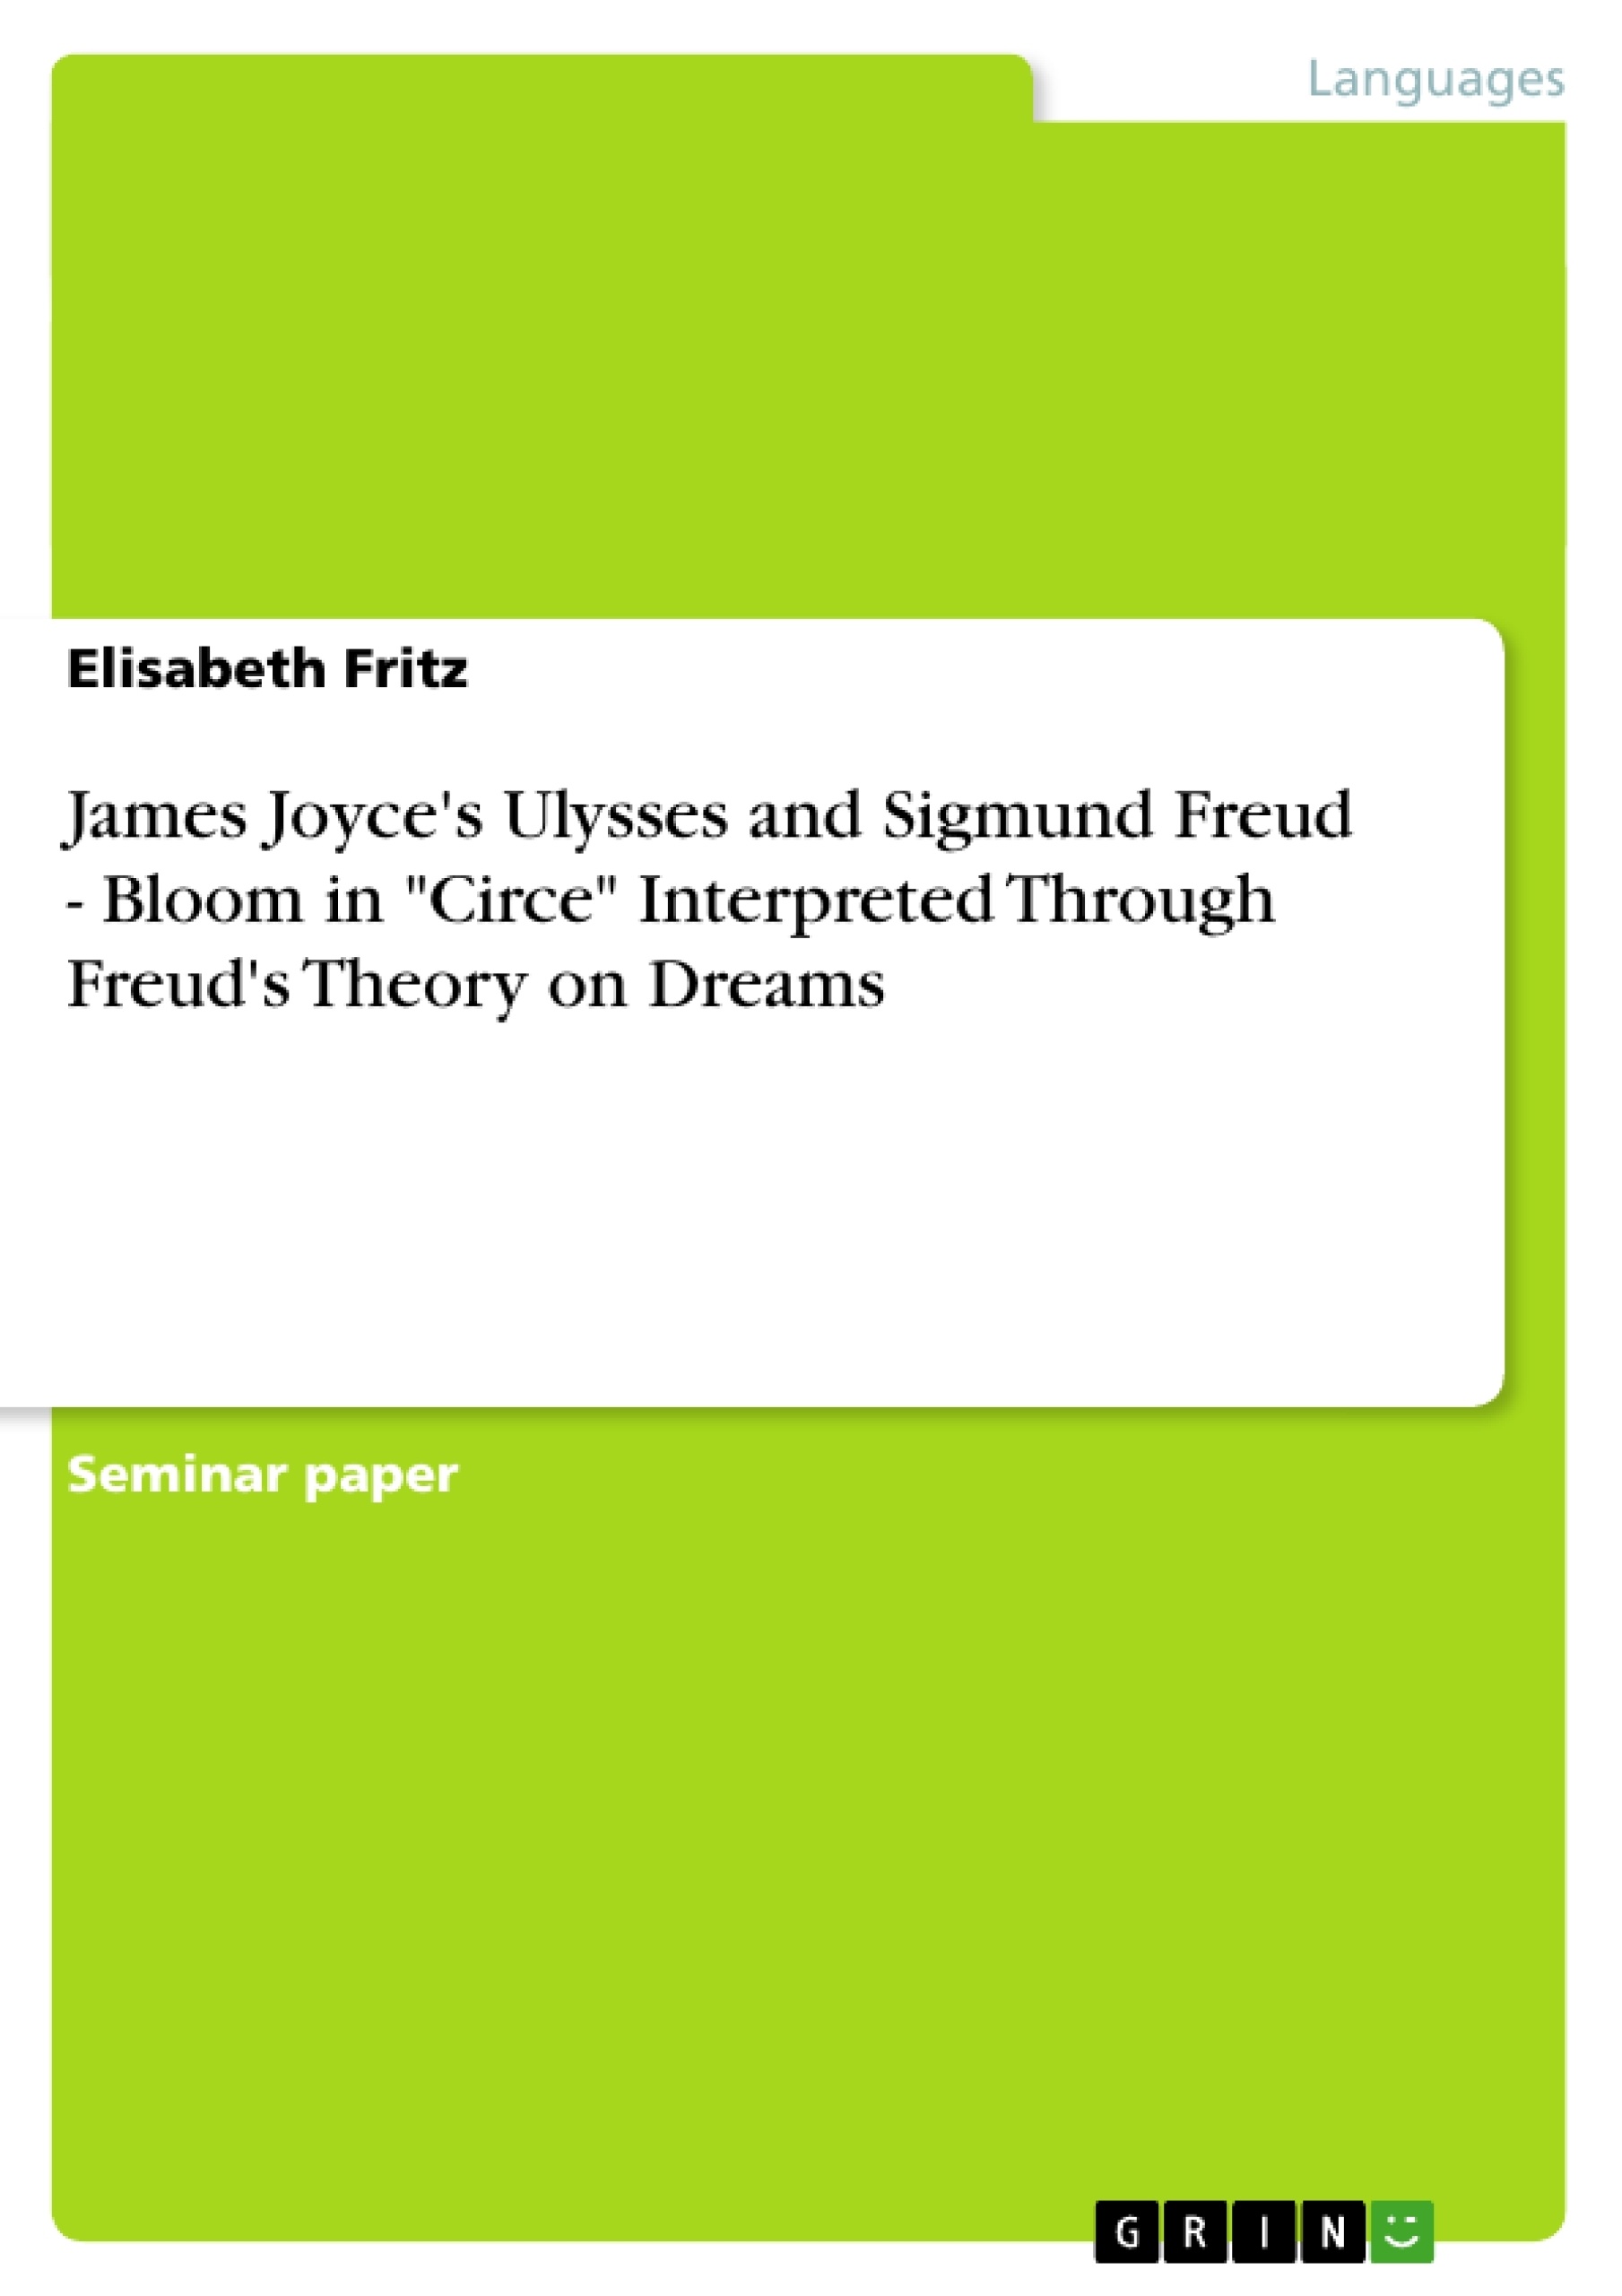 Título: James Joyce's Ulysses and Sigmund Freud - Bloom in "Circe" Interpreted Through Freud's Theory on Dreams